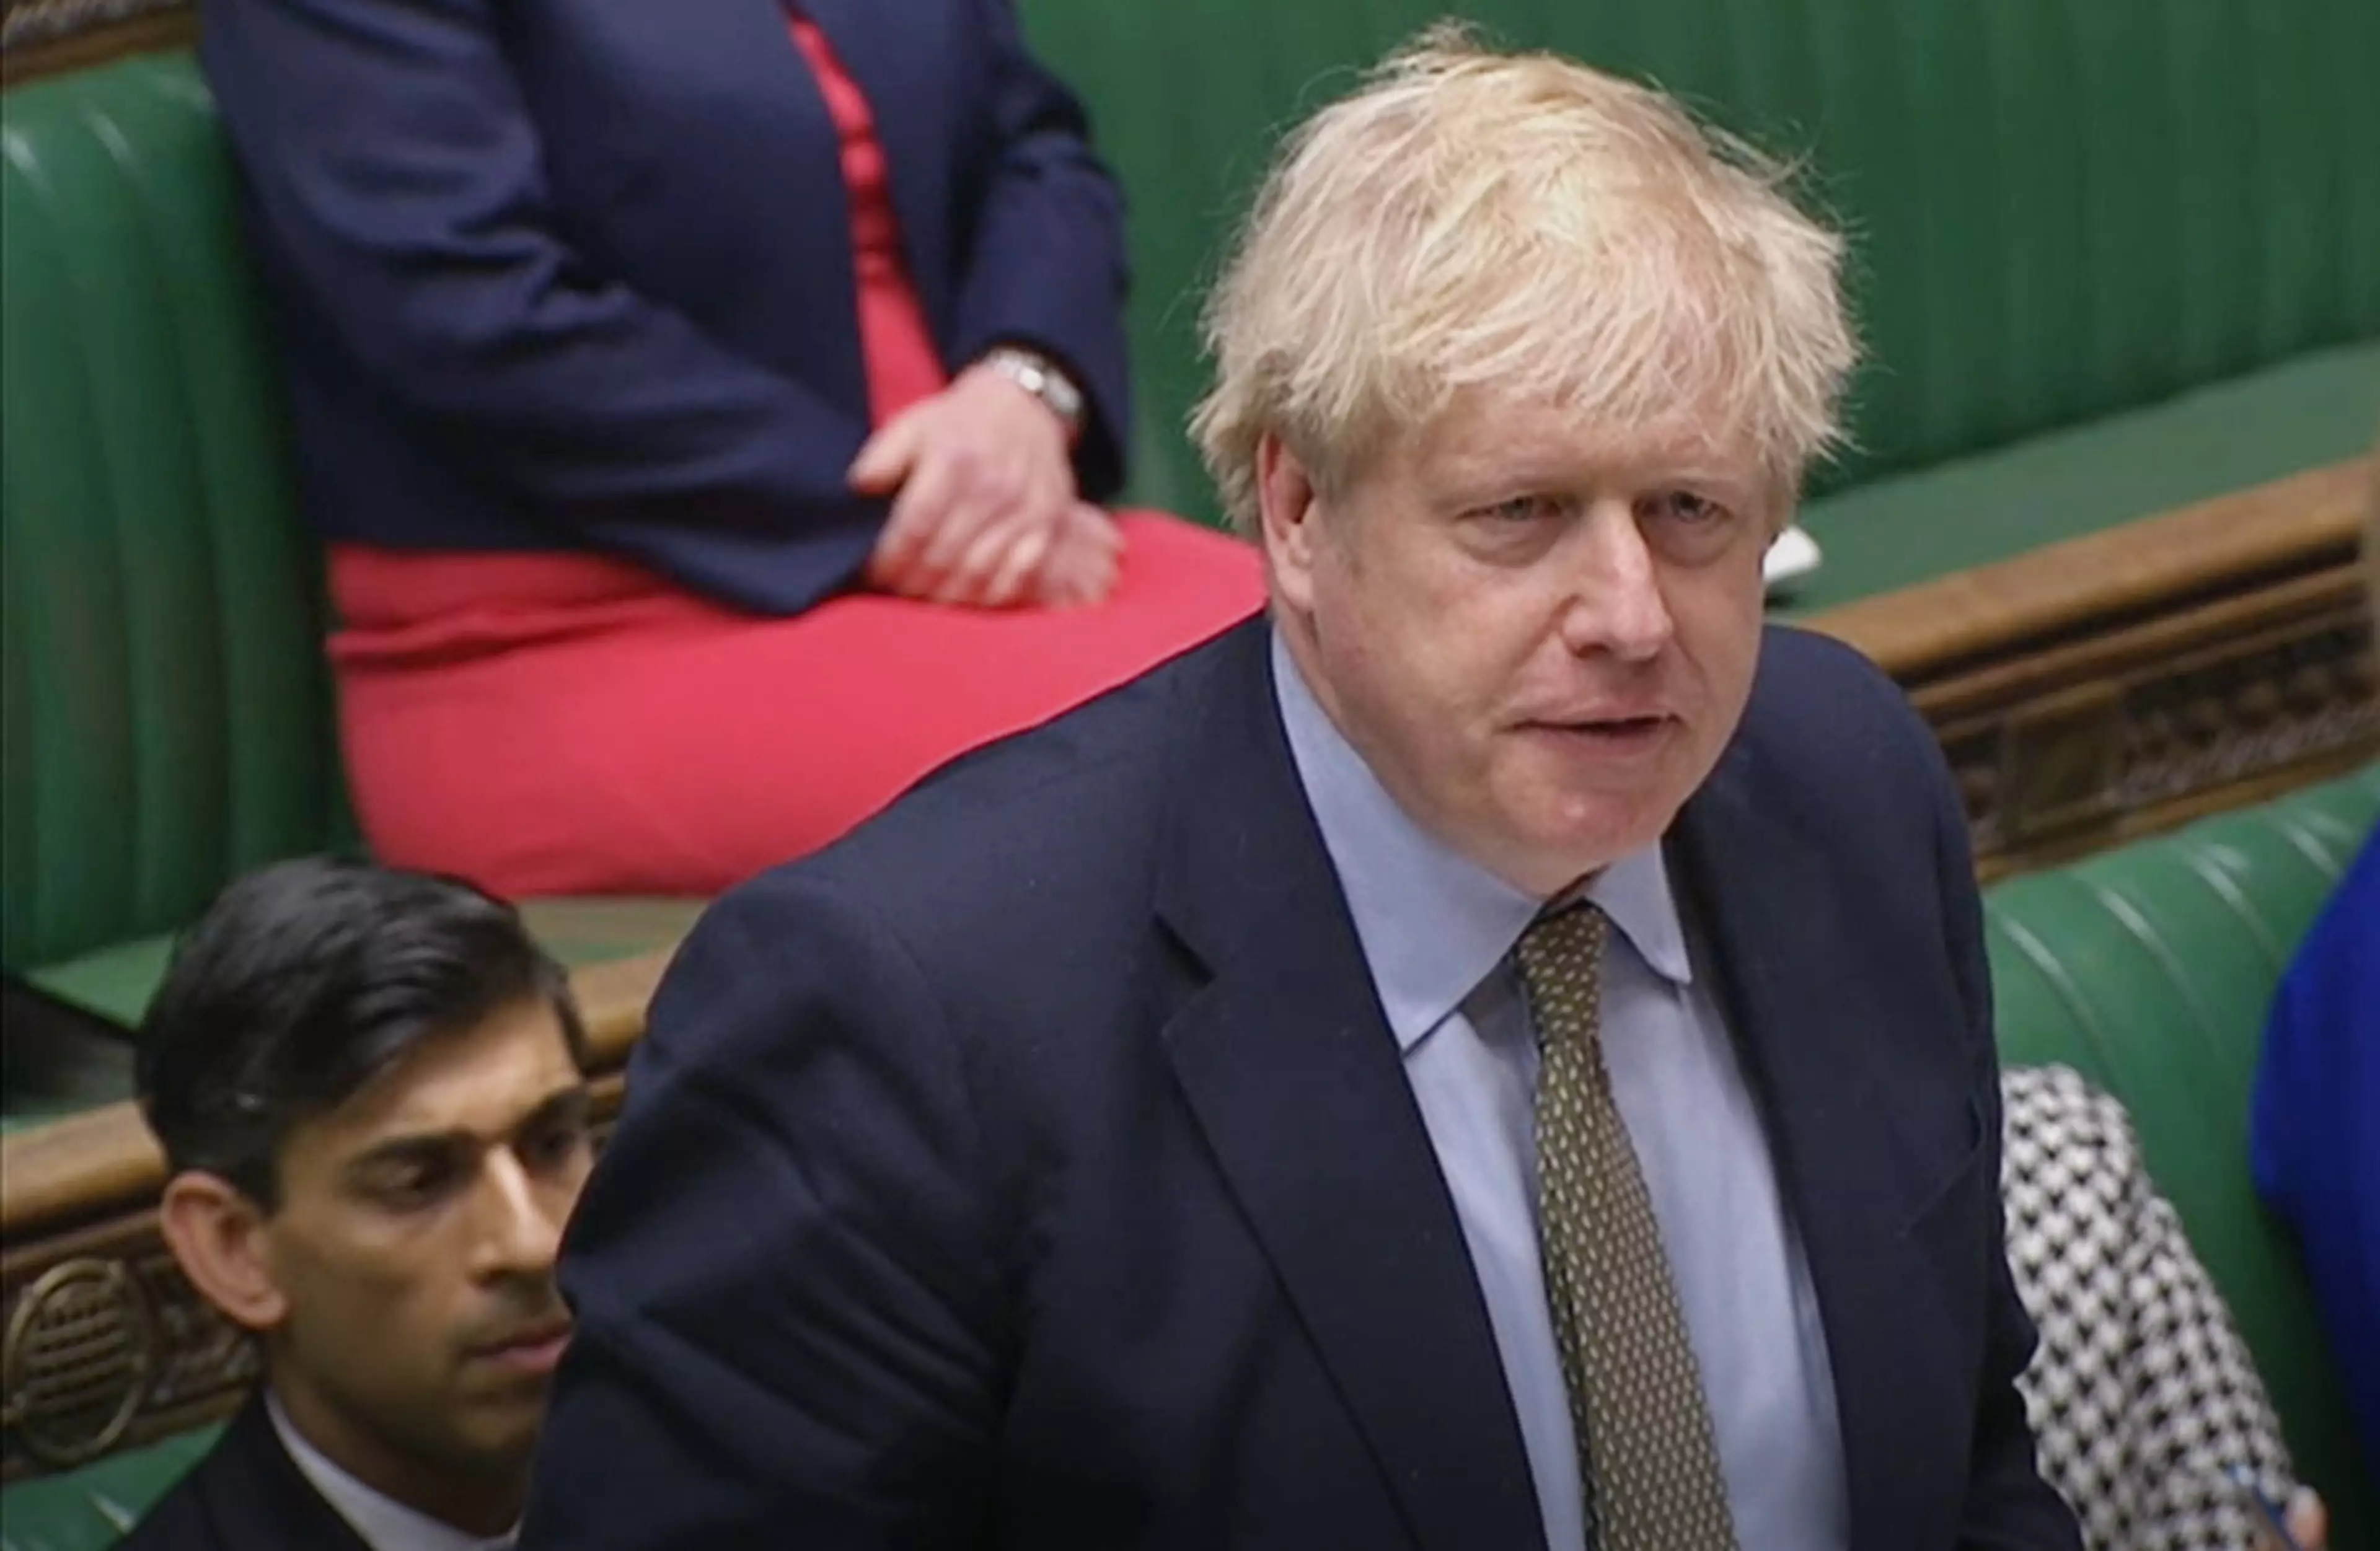 Boris Johnson added that exams will be scrapped.